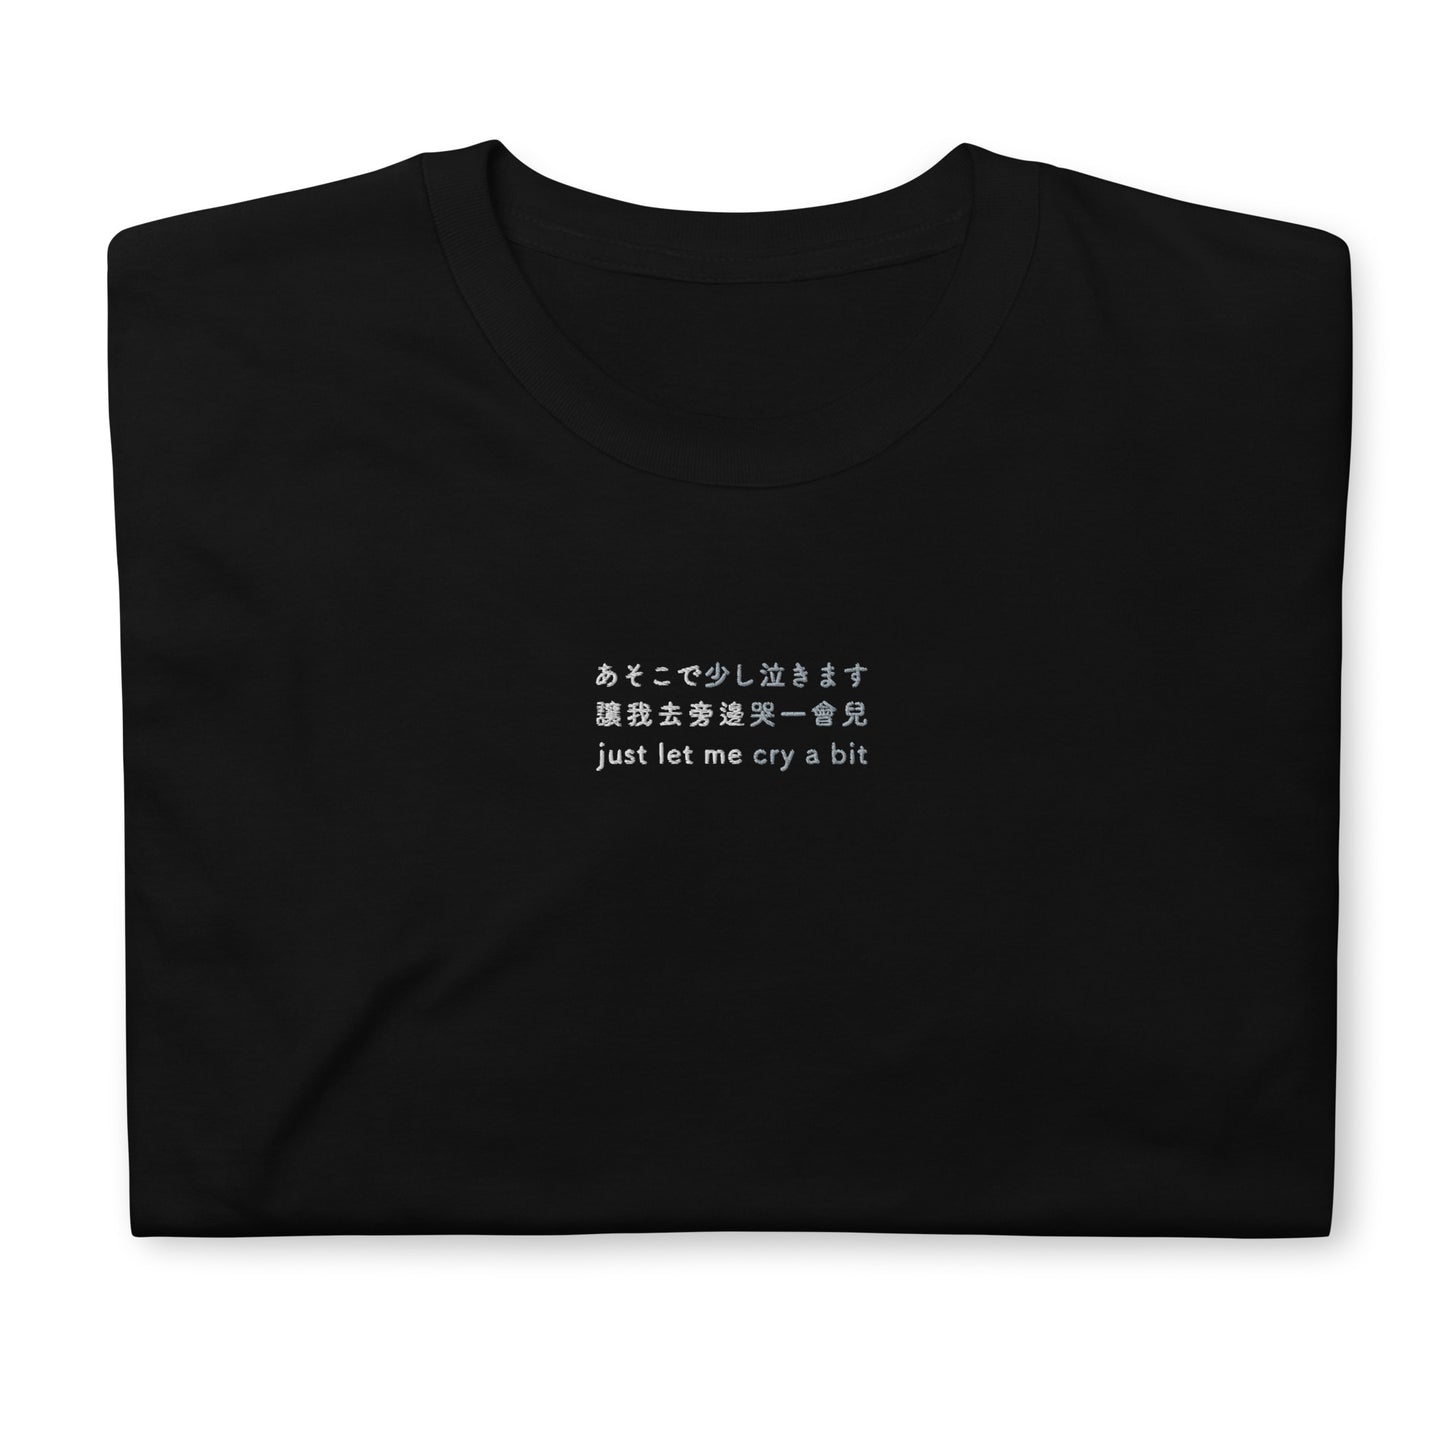 Black High Quality Tee - Front Design with an White,Light Gray Embroidery "Just Let Me Cry A Bit" in Japanese,Chinese and English